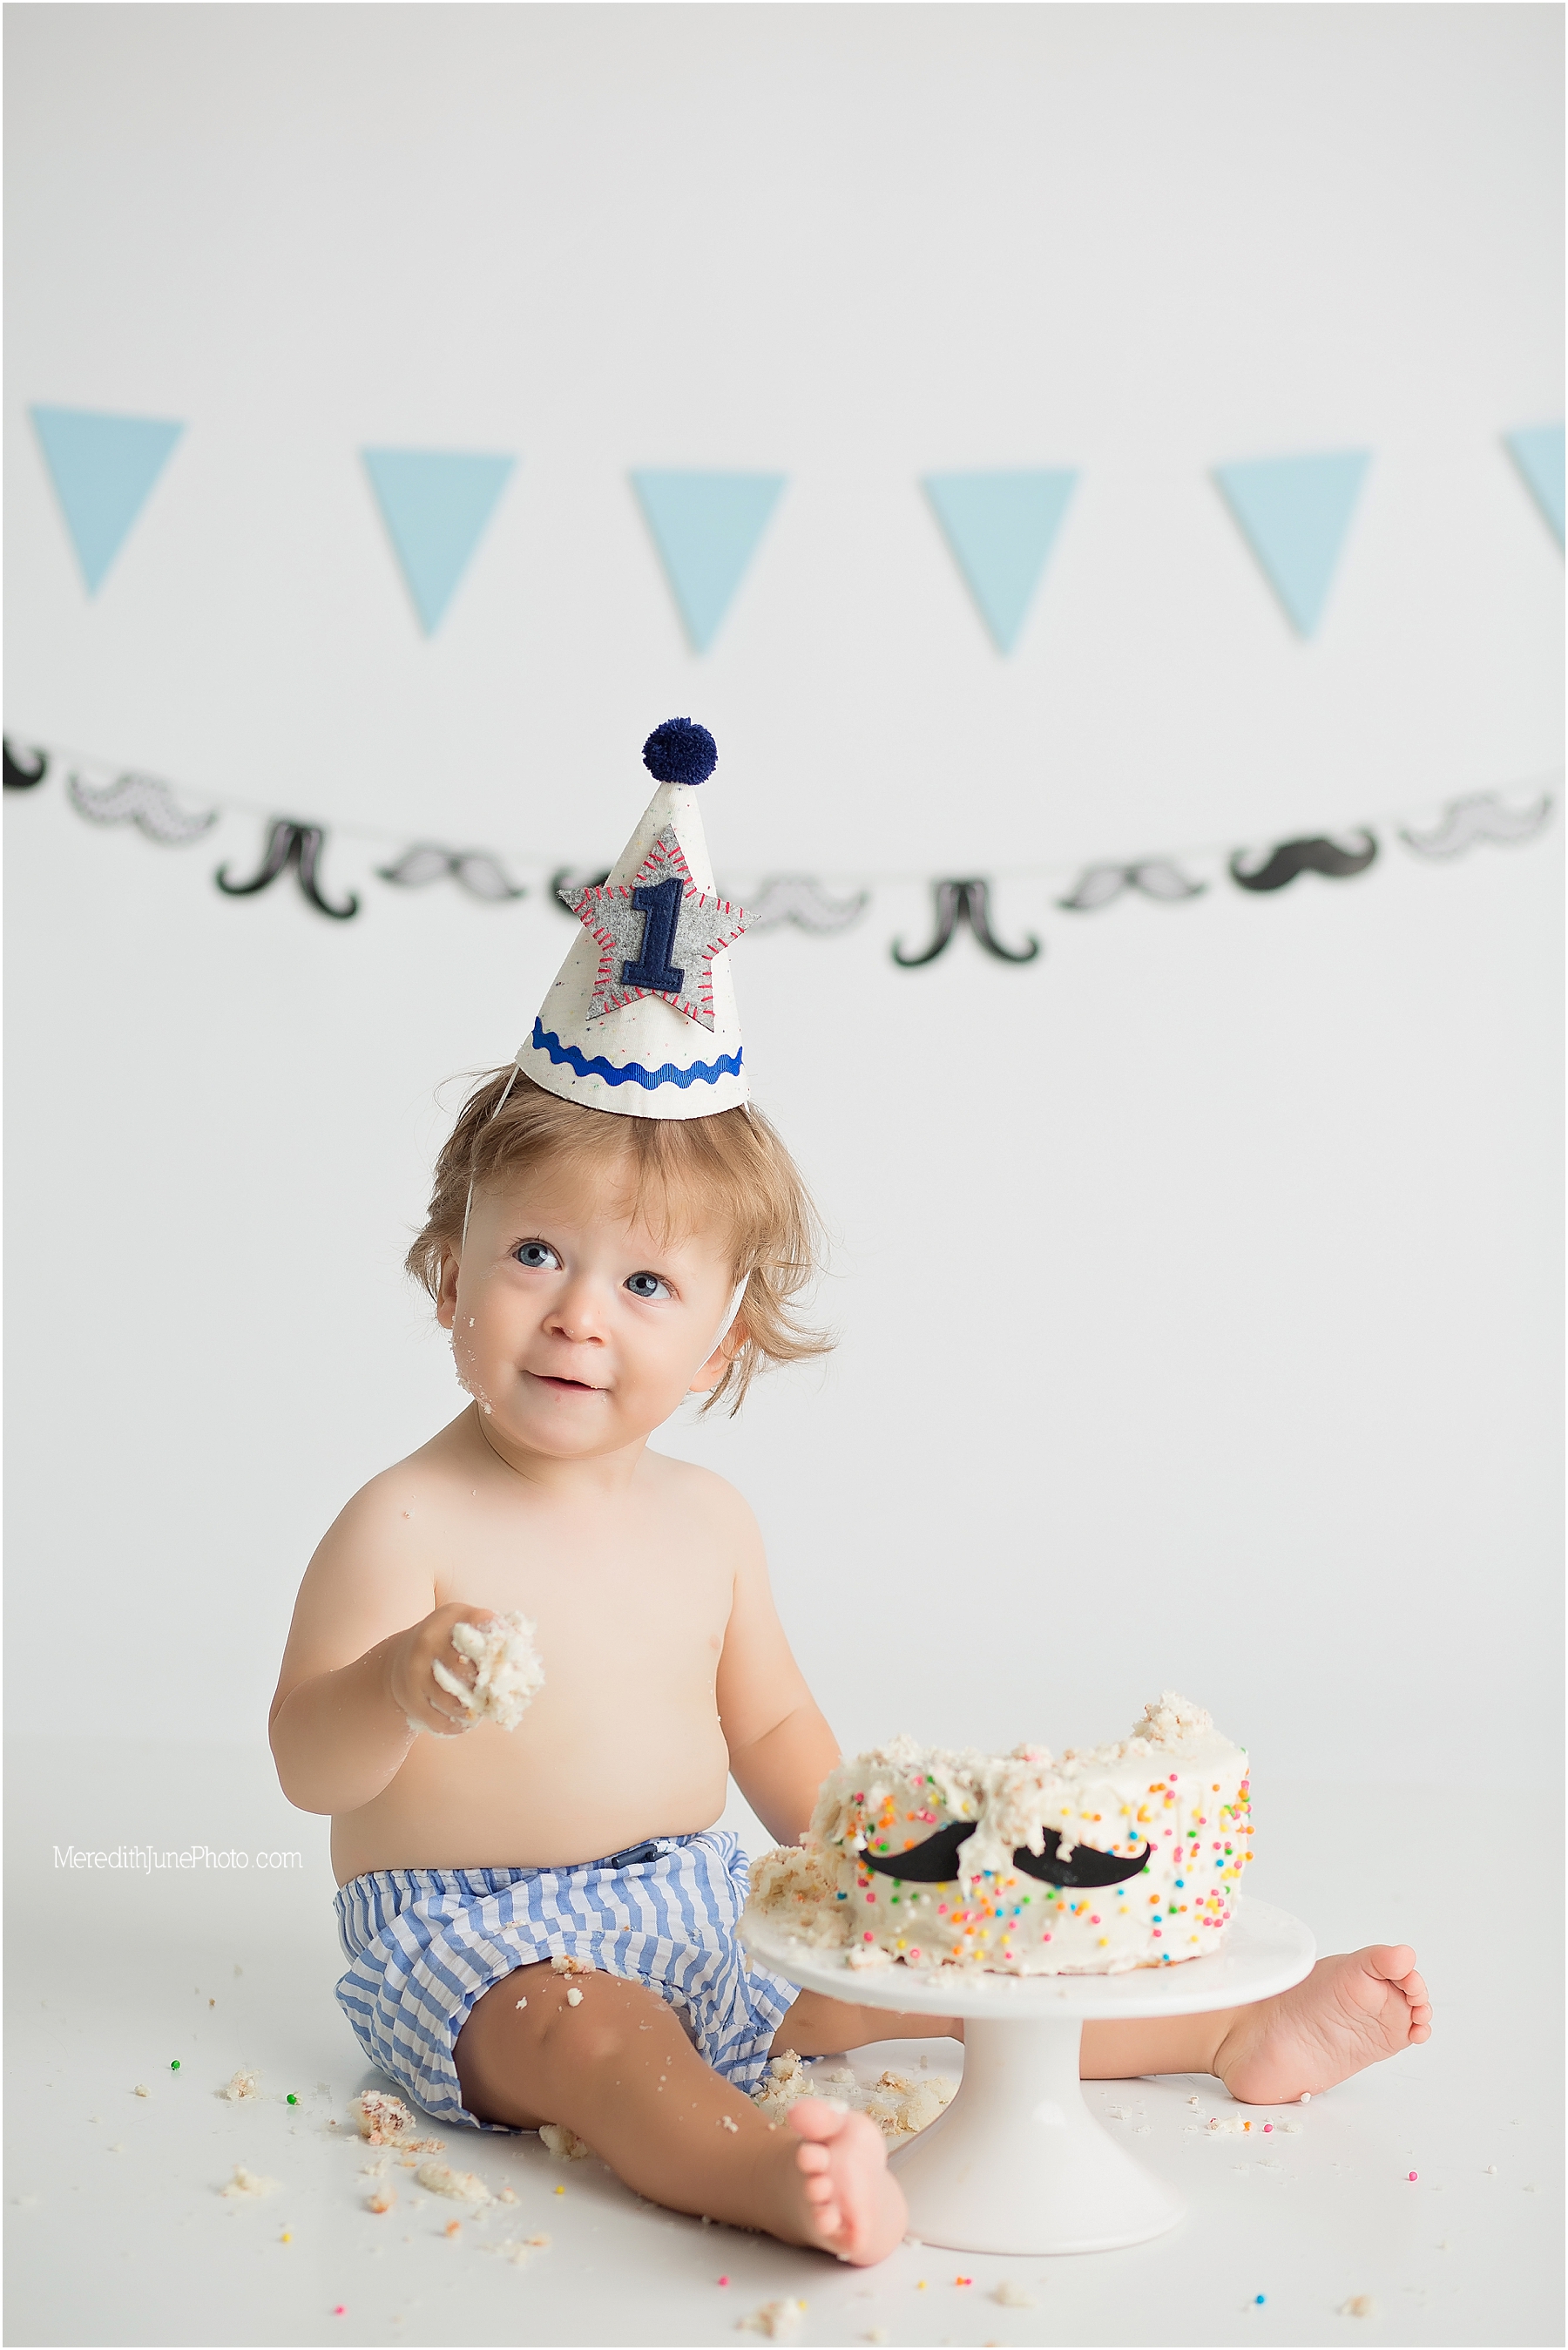 Alexander's first birthday at Meredith June Photography